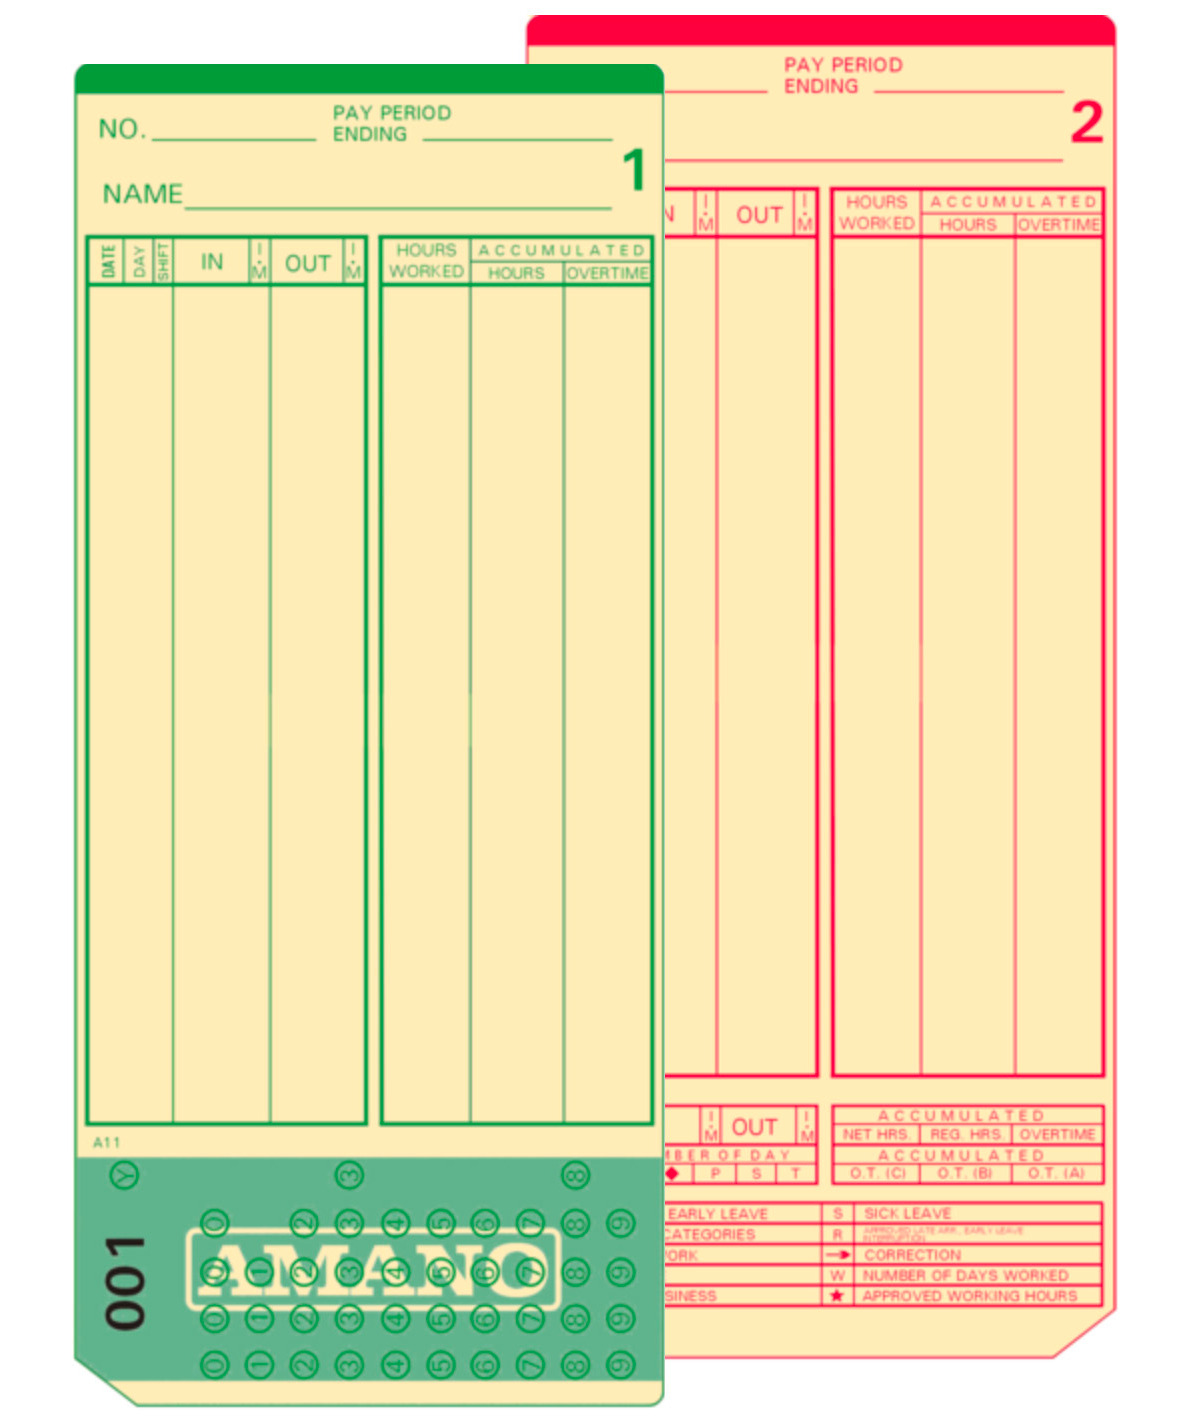 Amano AMA-099000 Time Cards for MJR-7000